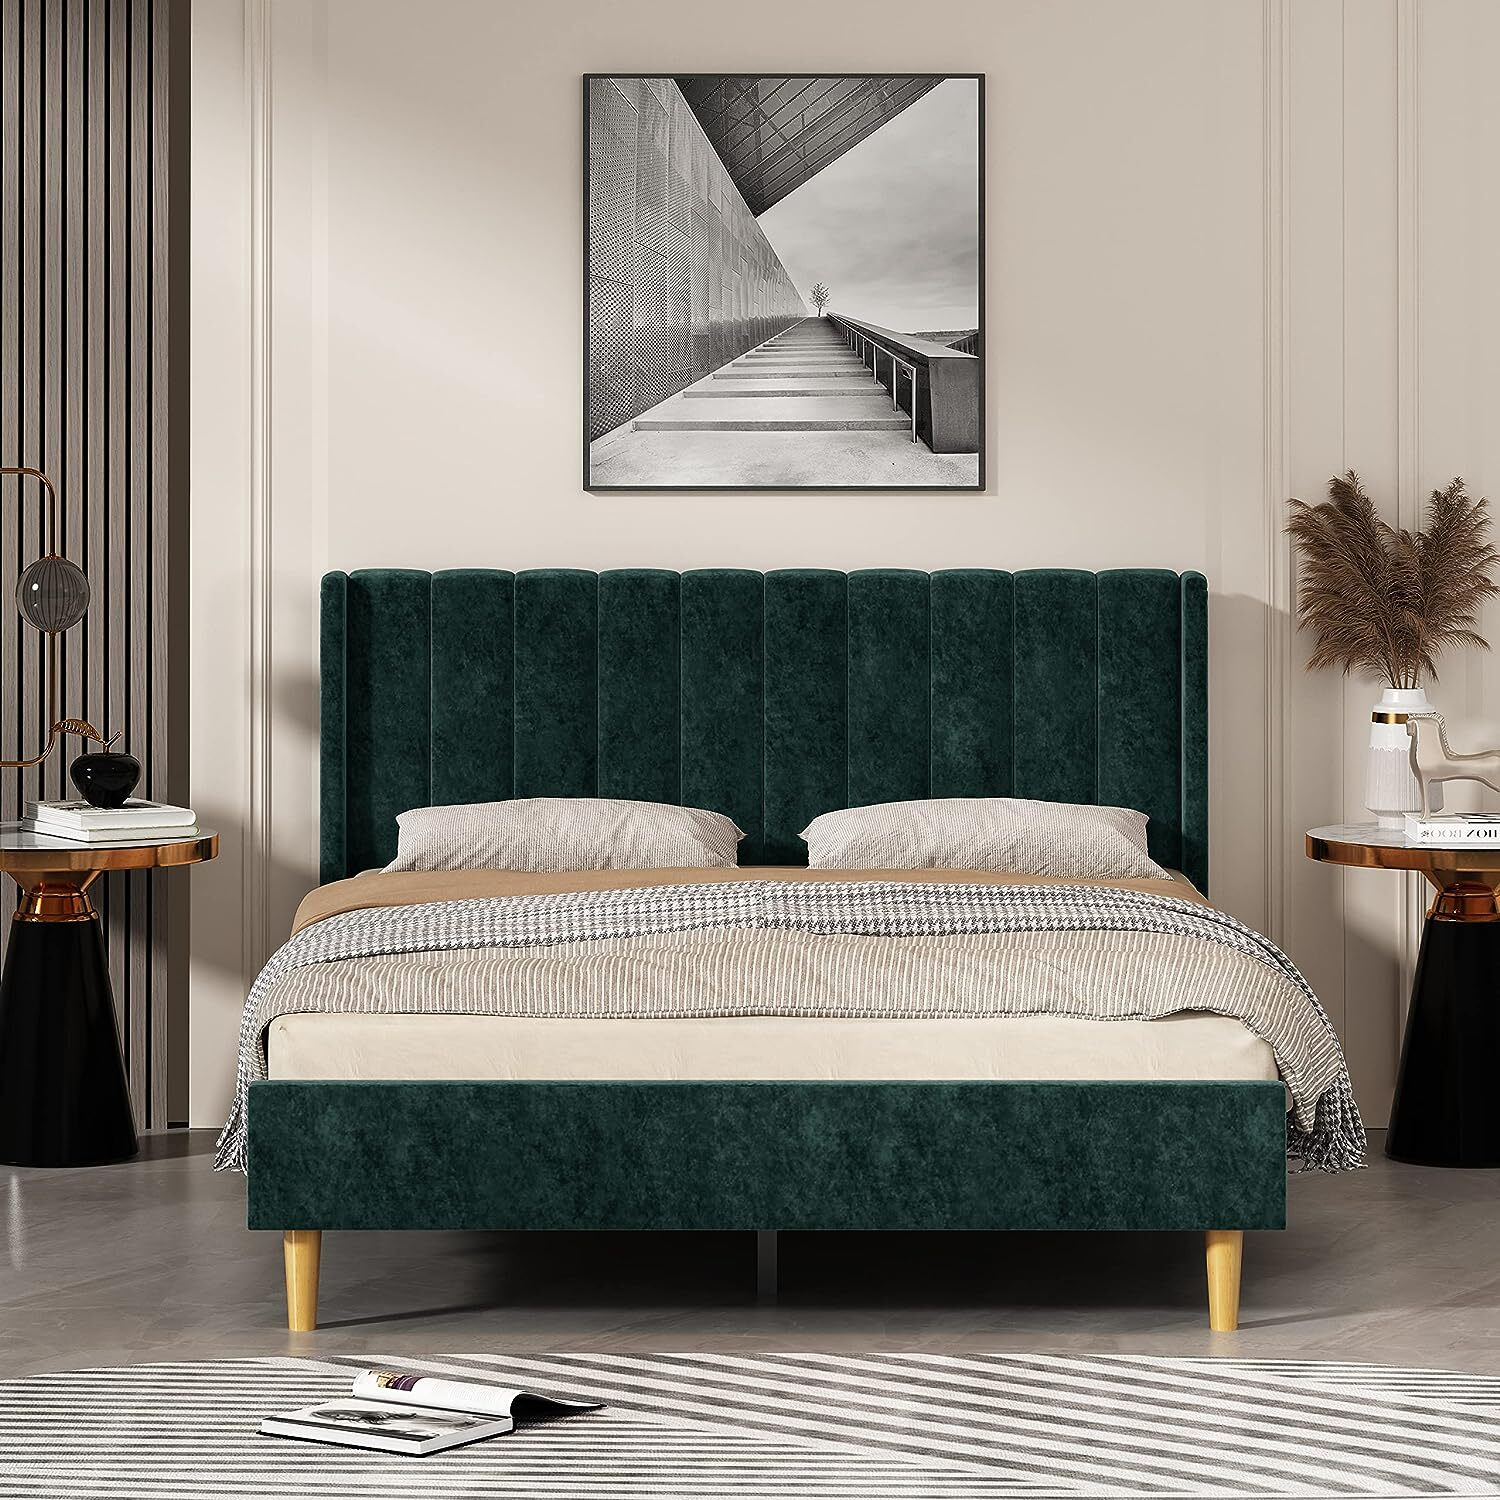 How to Match the Green Velvet Bed with the Right Furniture Style